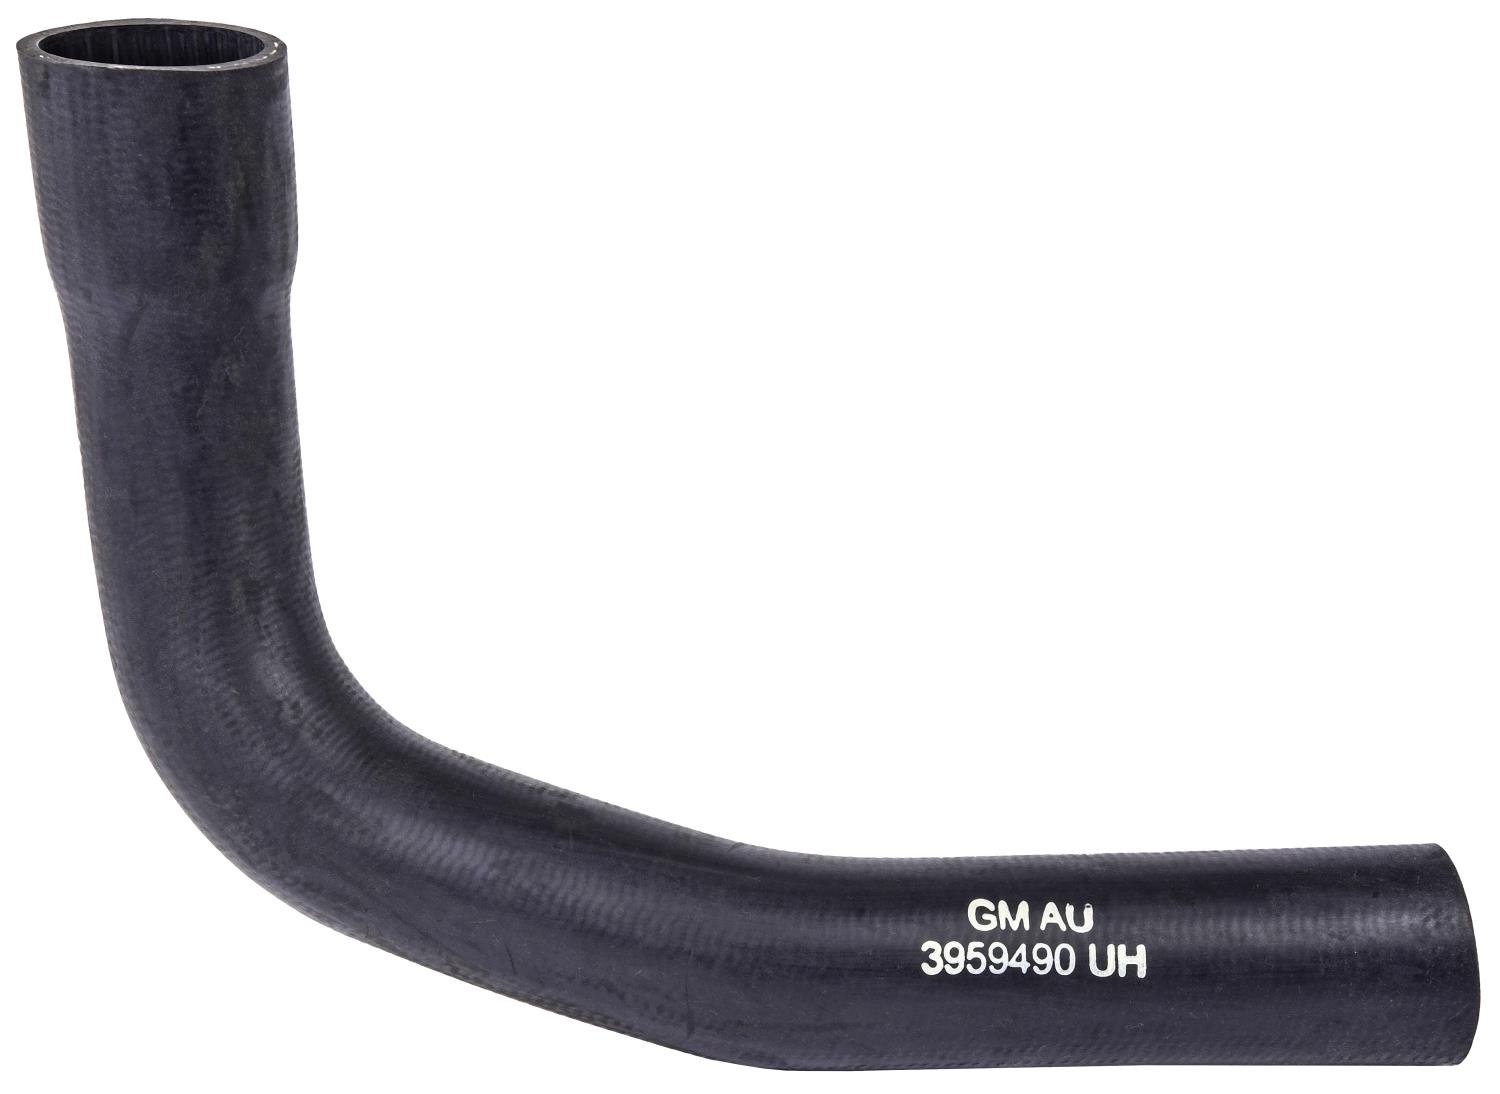 Lower Radiator Hose for 1969-1974 Chevrolet Chevy II Nova [Direct-Fit Replacement for GM 3959490]